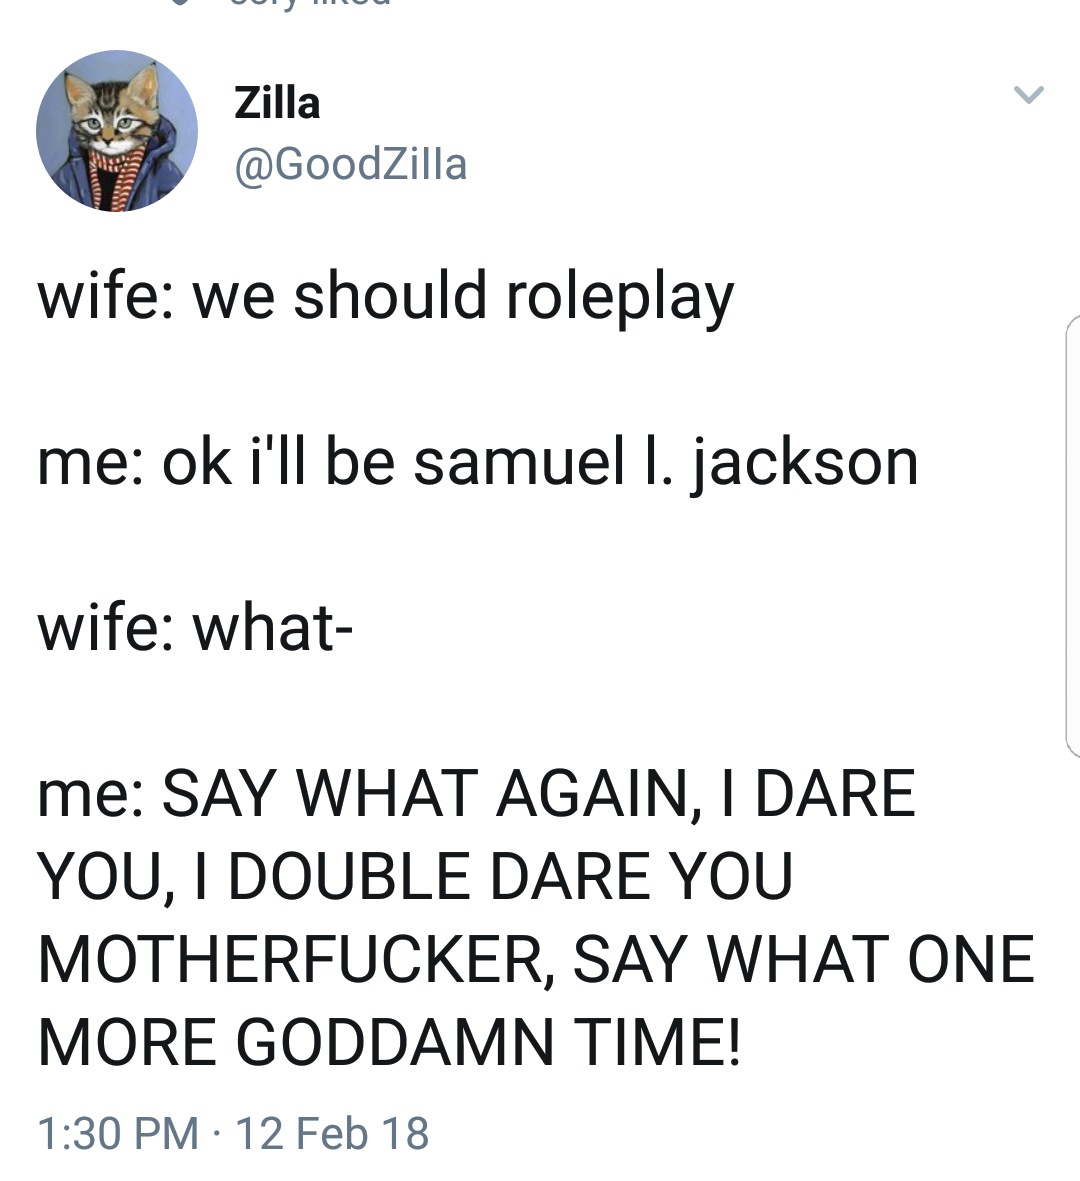 funny tweet of role playing with the wife Samuel L Jackson